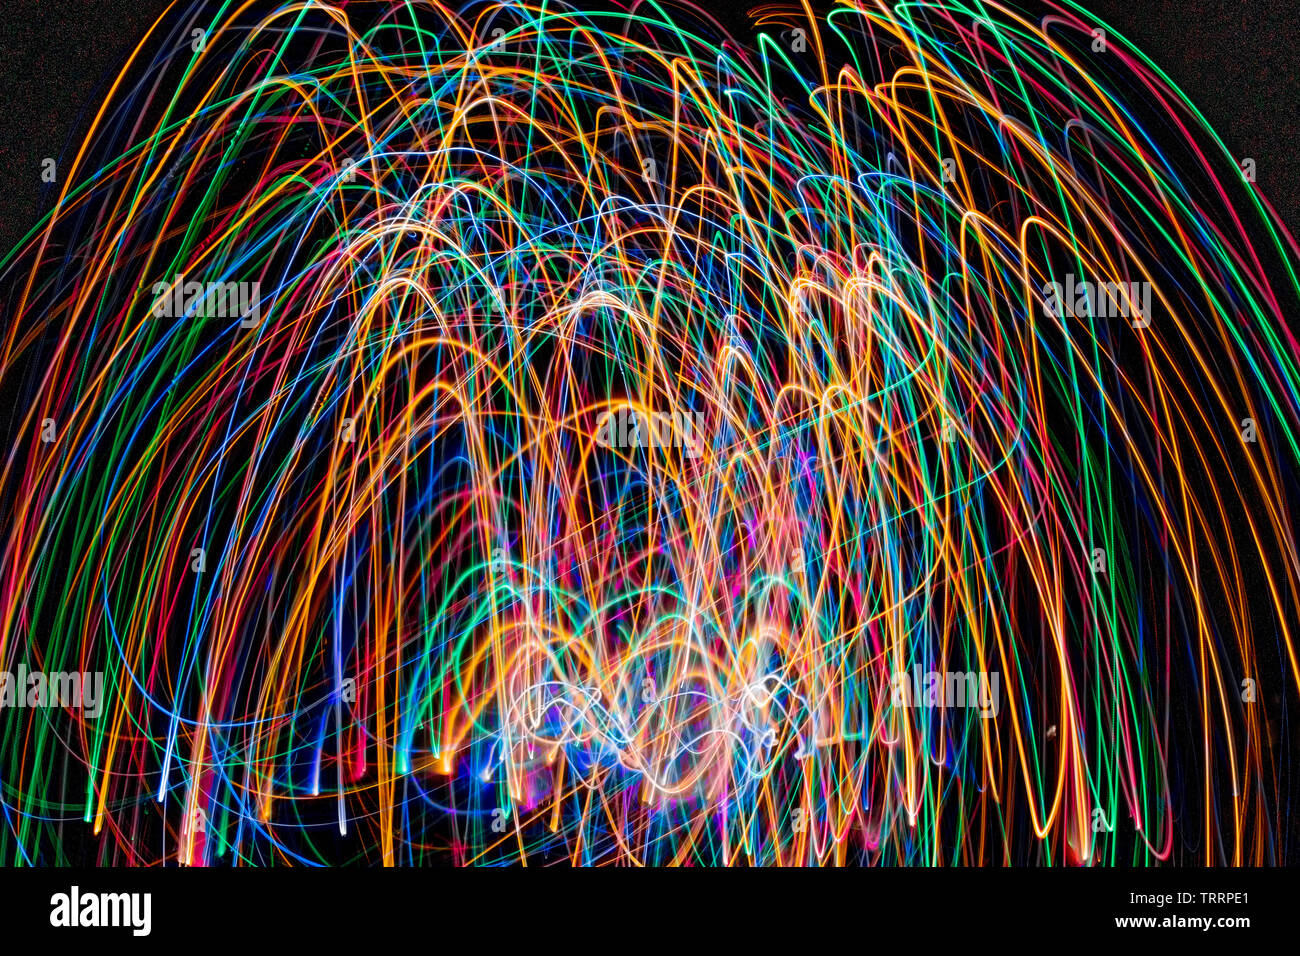 Abstract photographs of action light painting. Stock Photo